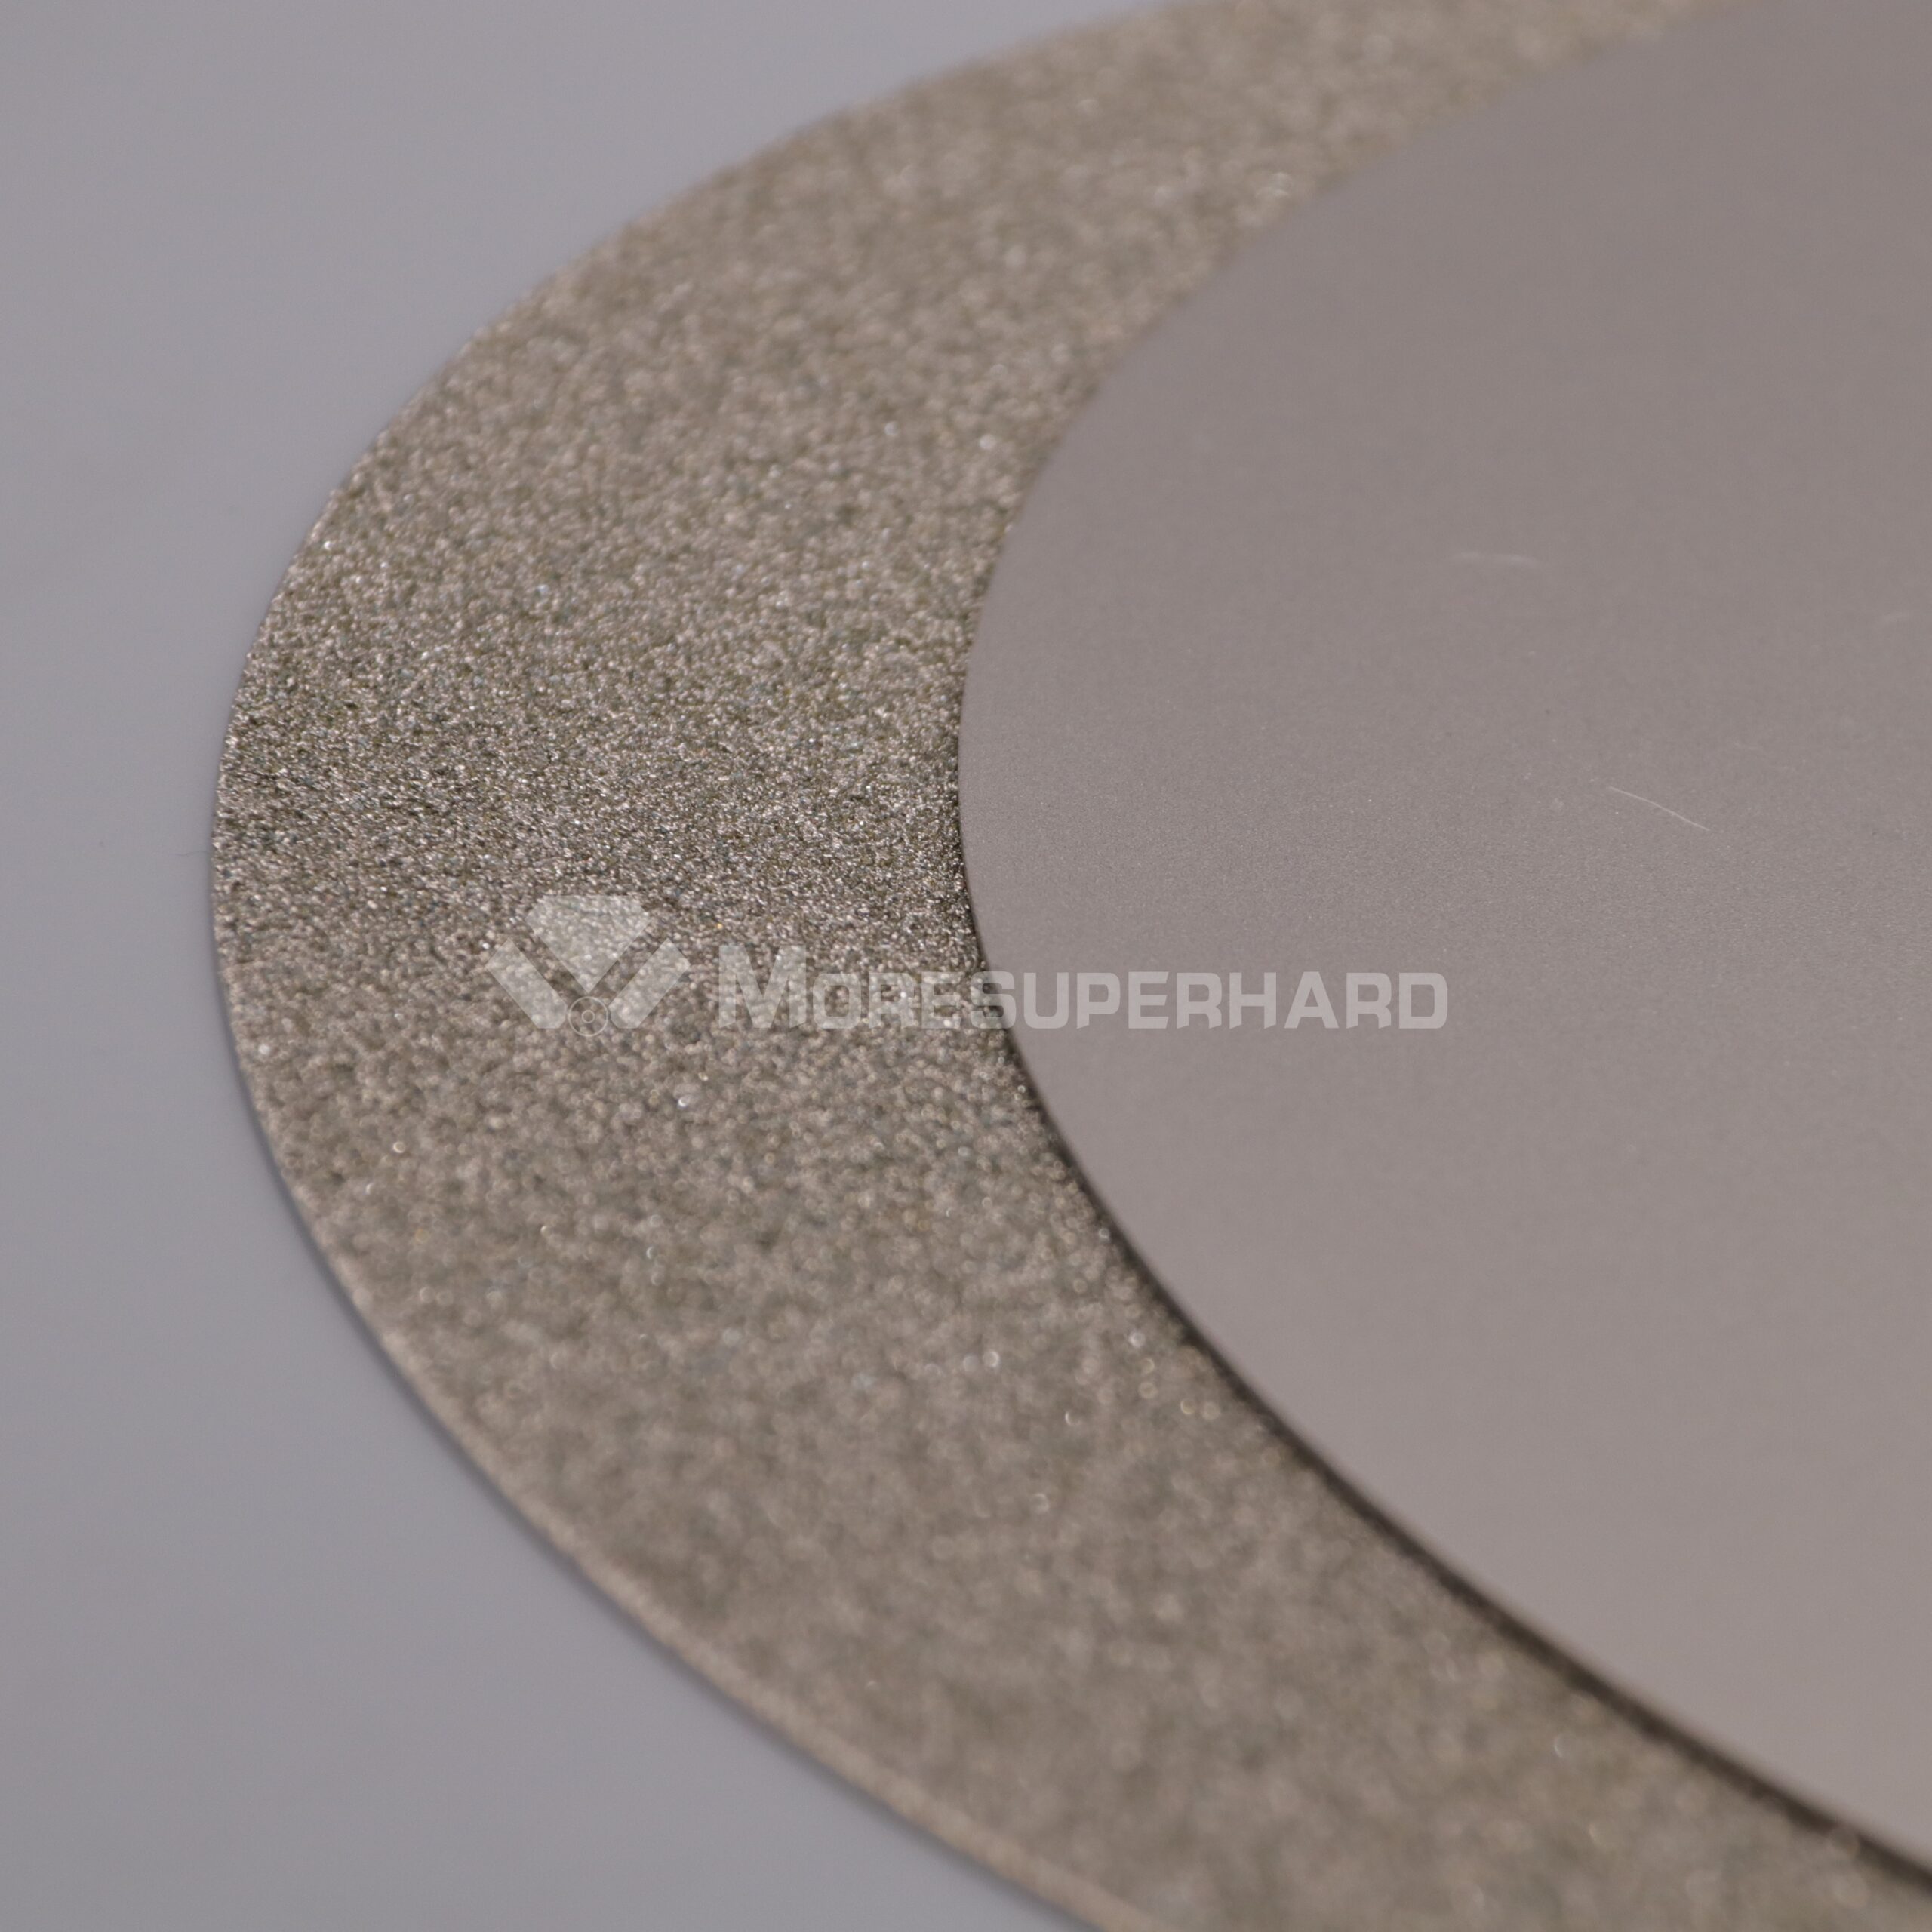 Electroplated Lapping Discs for Gemstone Polishing